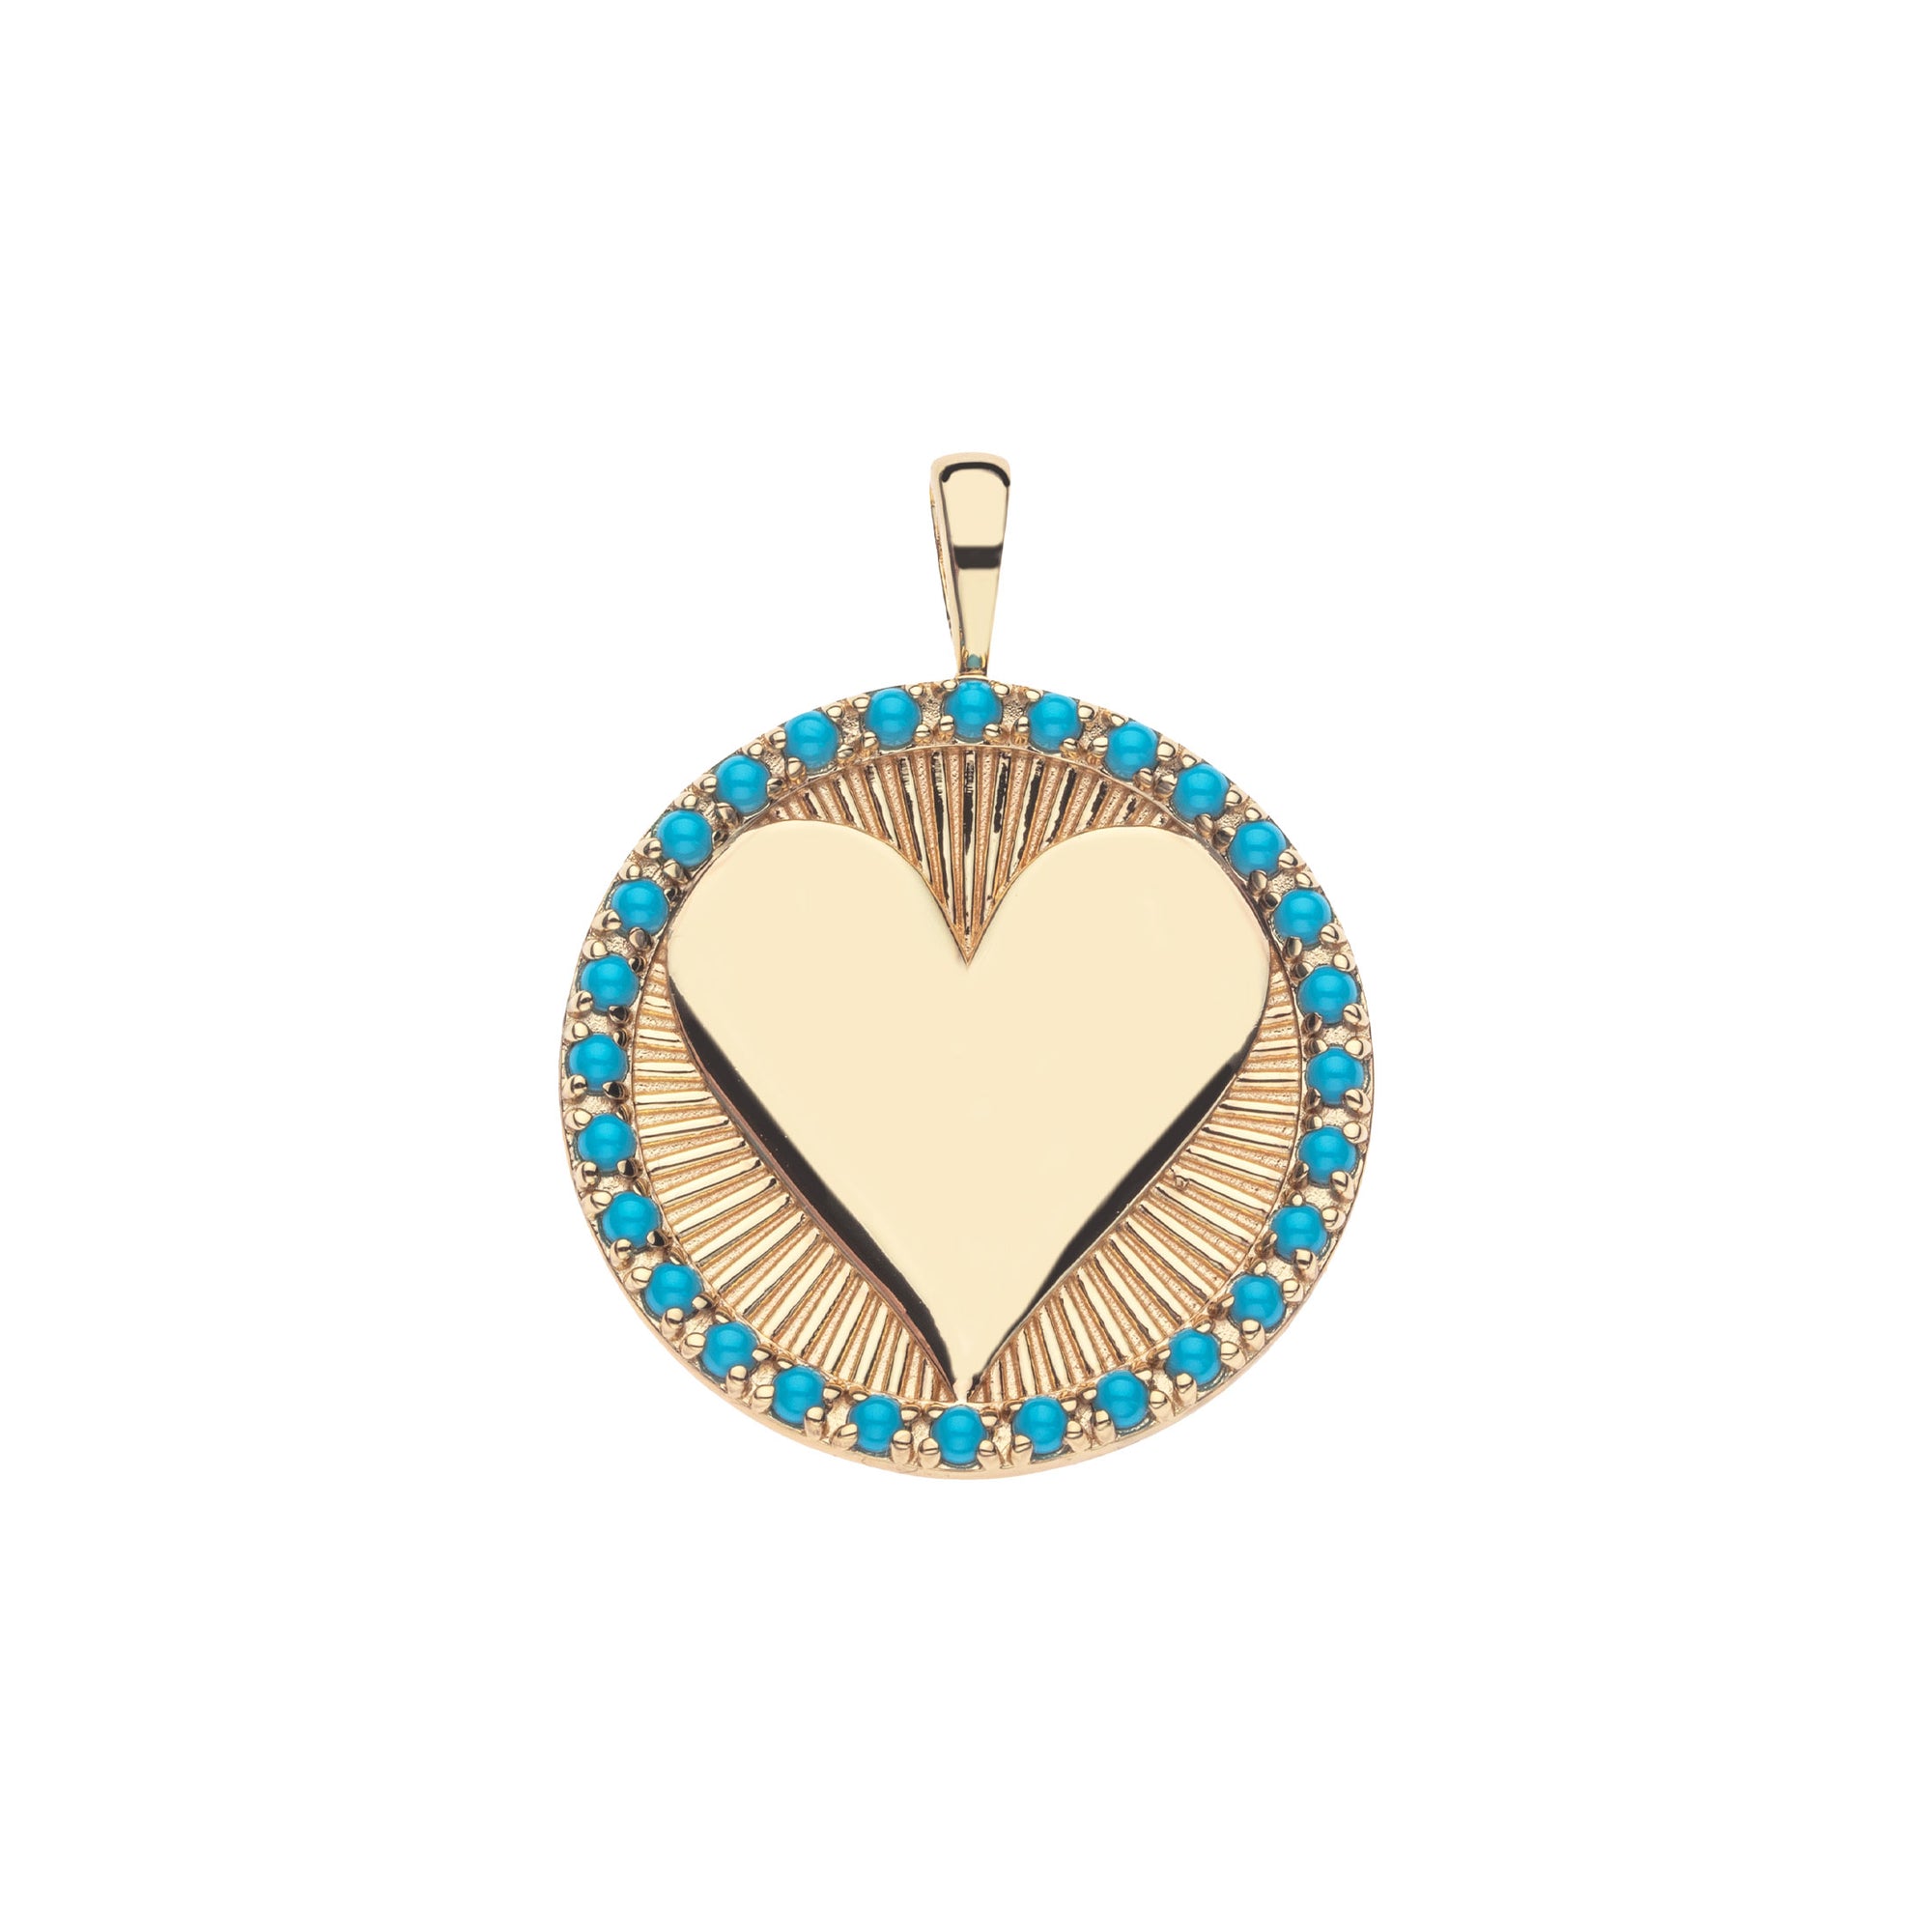 LOVE Embellished Hearts Find Me in Turquoise